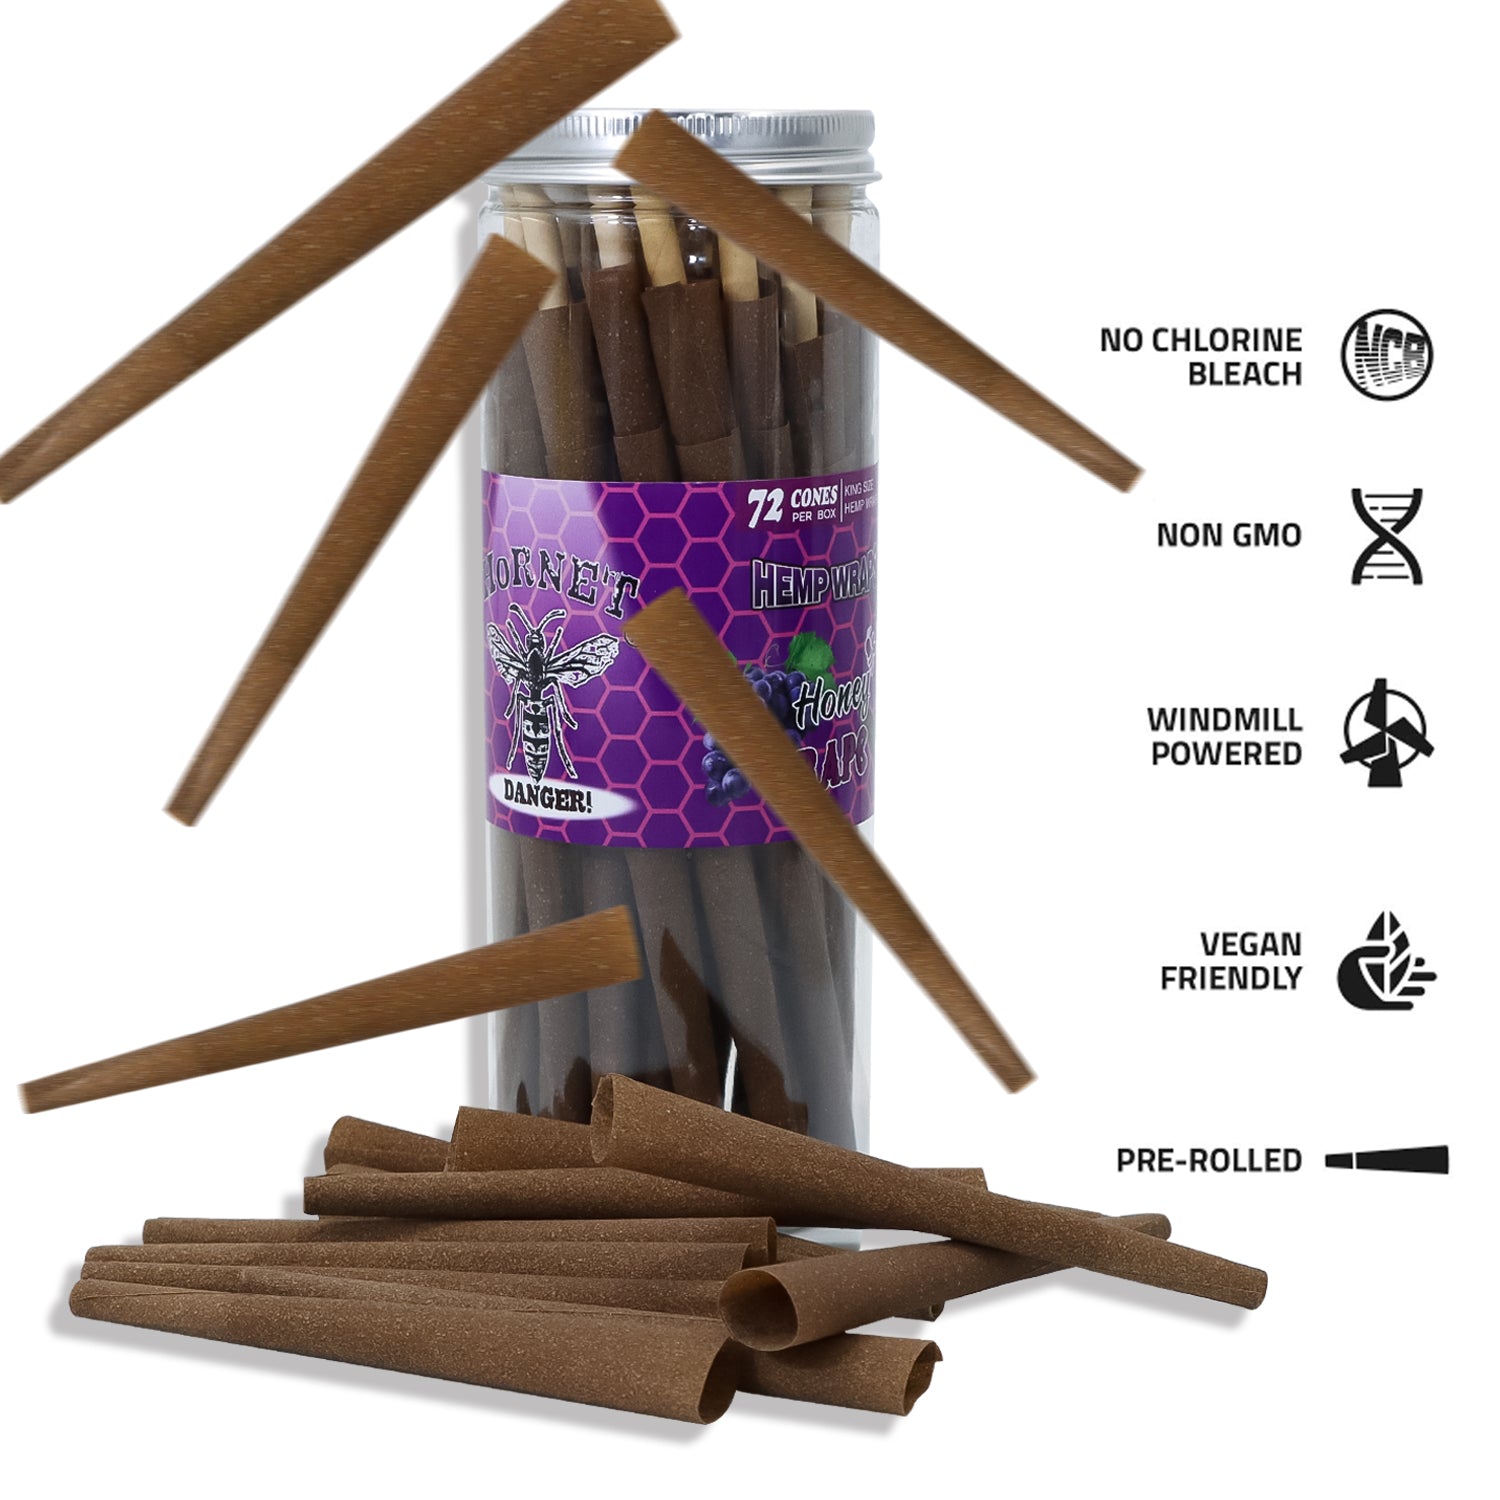 HORNET Grape Flavored Pre Rolled Cones, King Size Brown Pre Rolled Rolling Paper with tips, Slow Burning Rolling Cones & load, 72 PCS / Jar